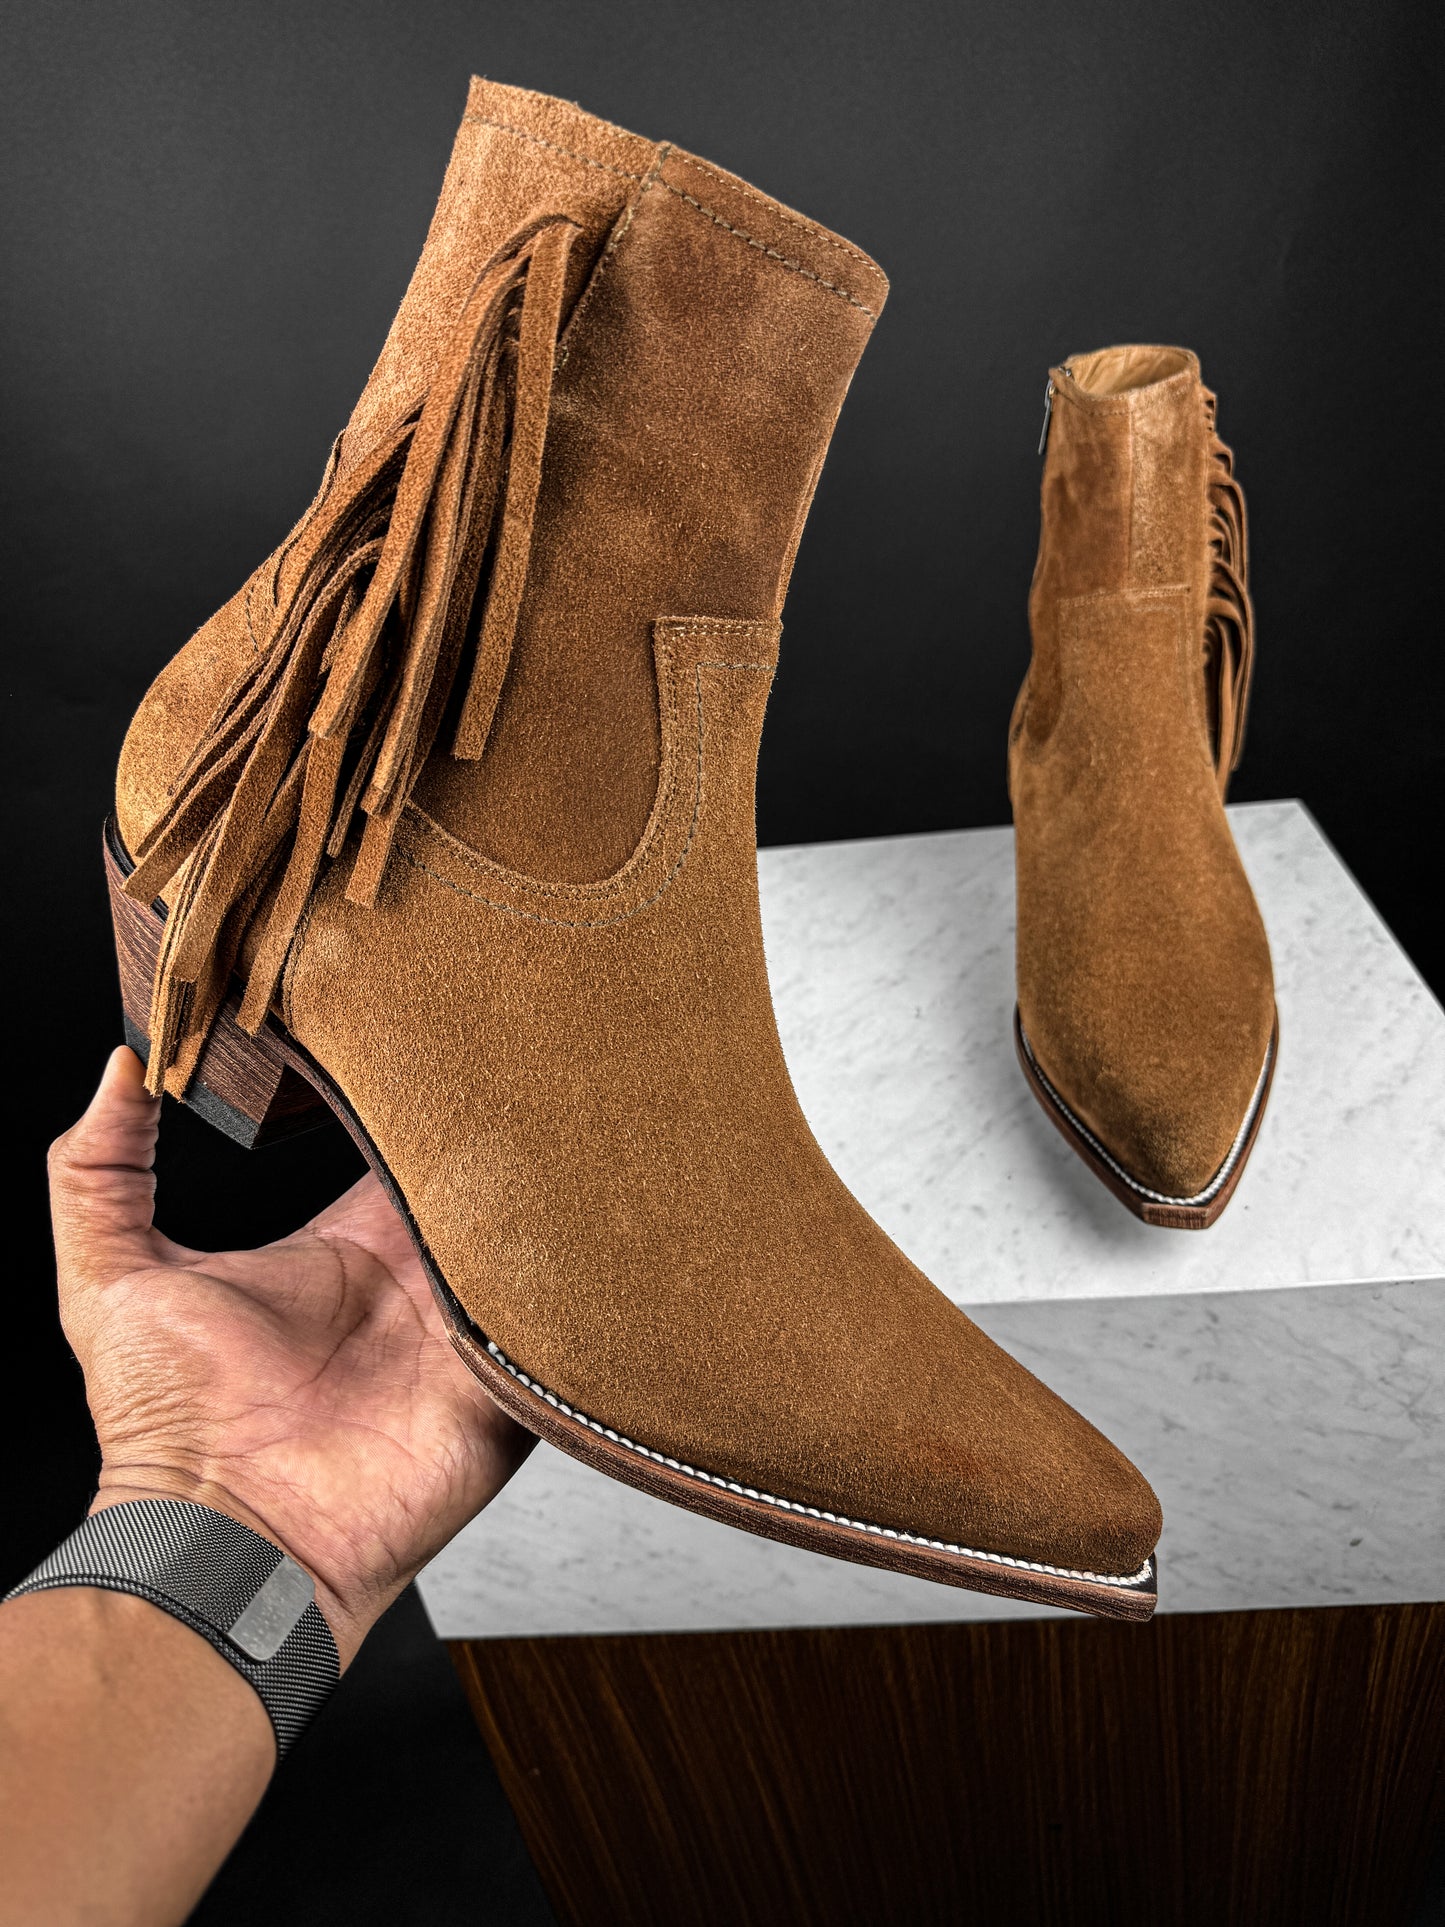 CHESTNUT FRINGED BOOTS